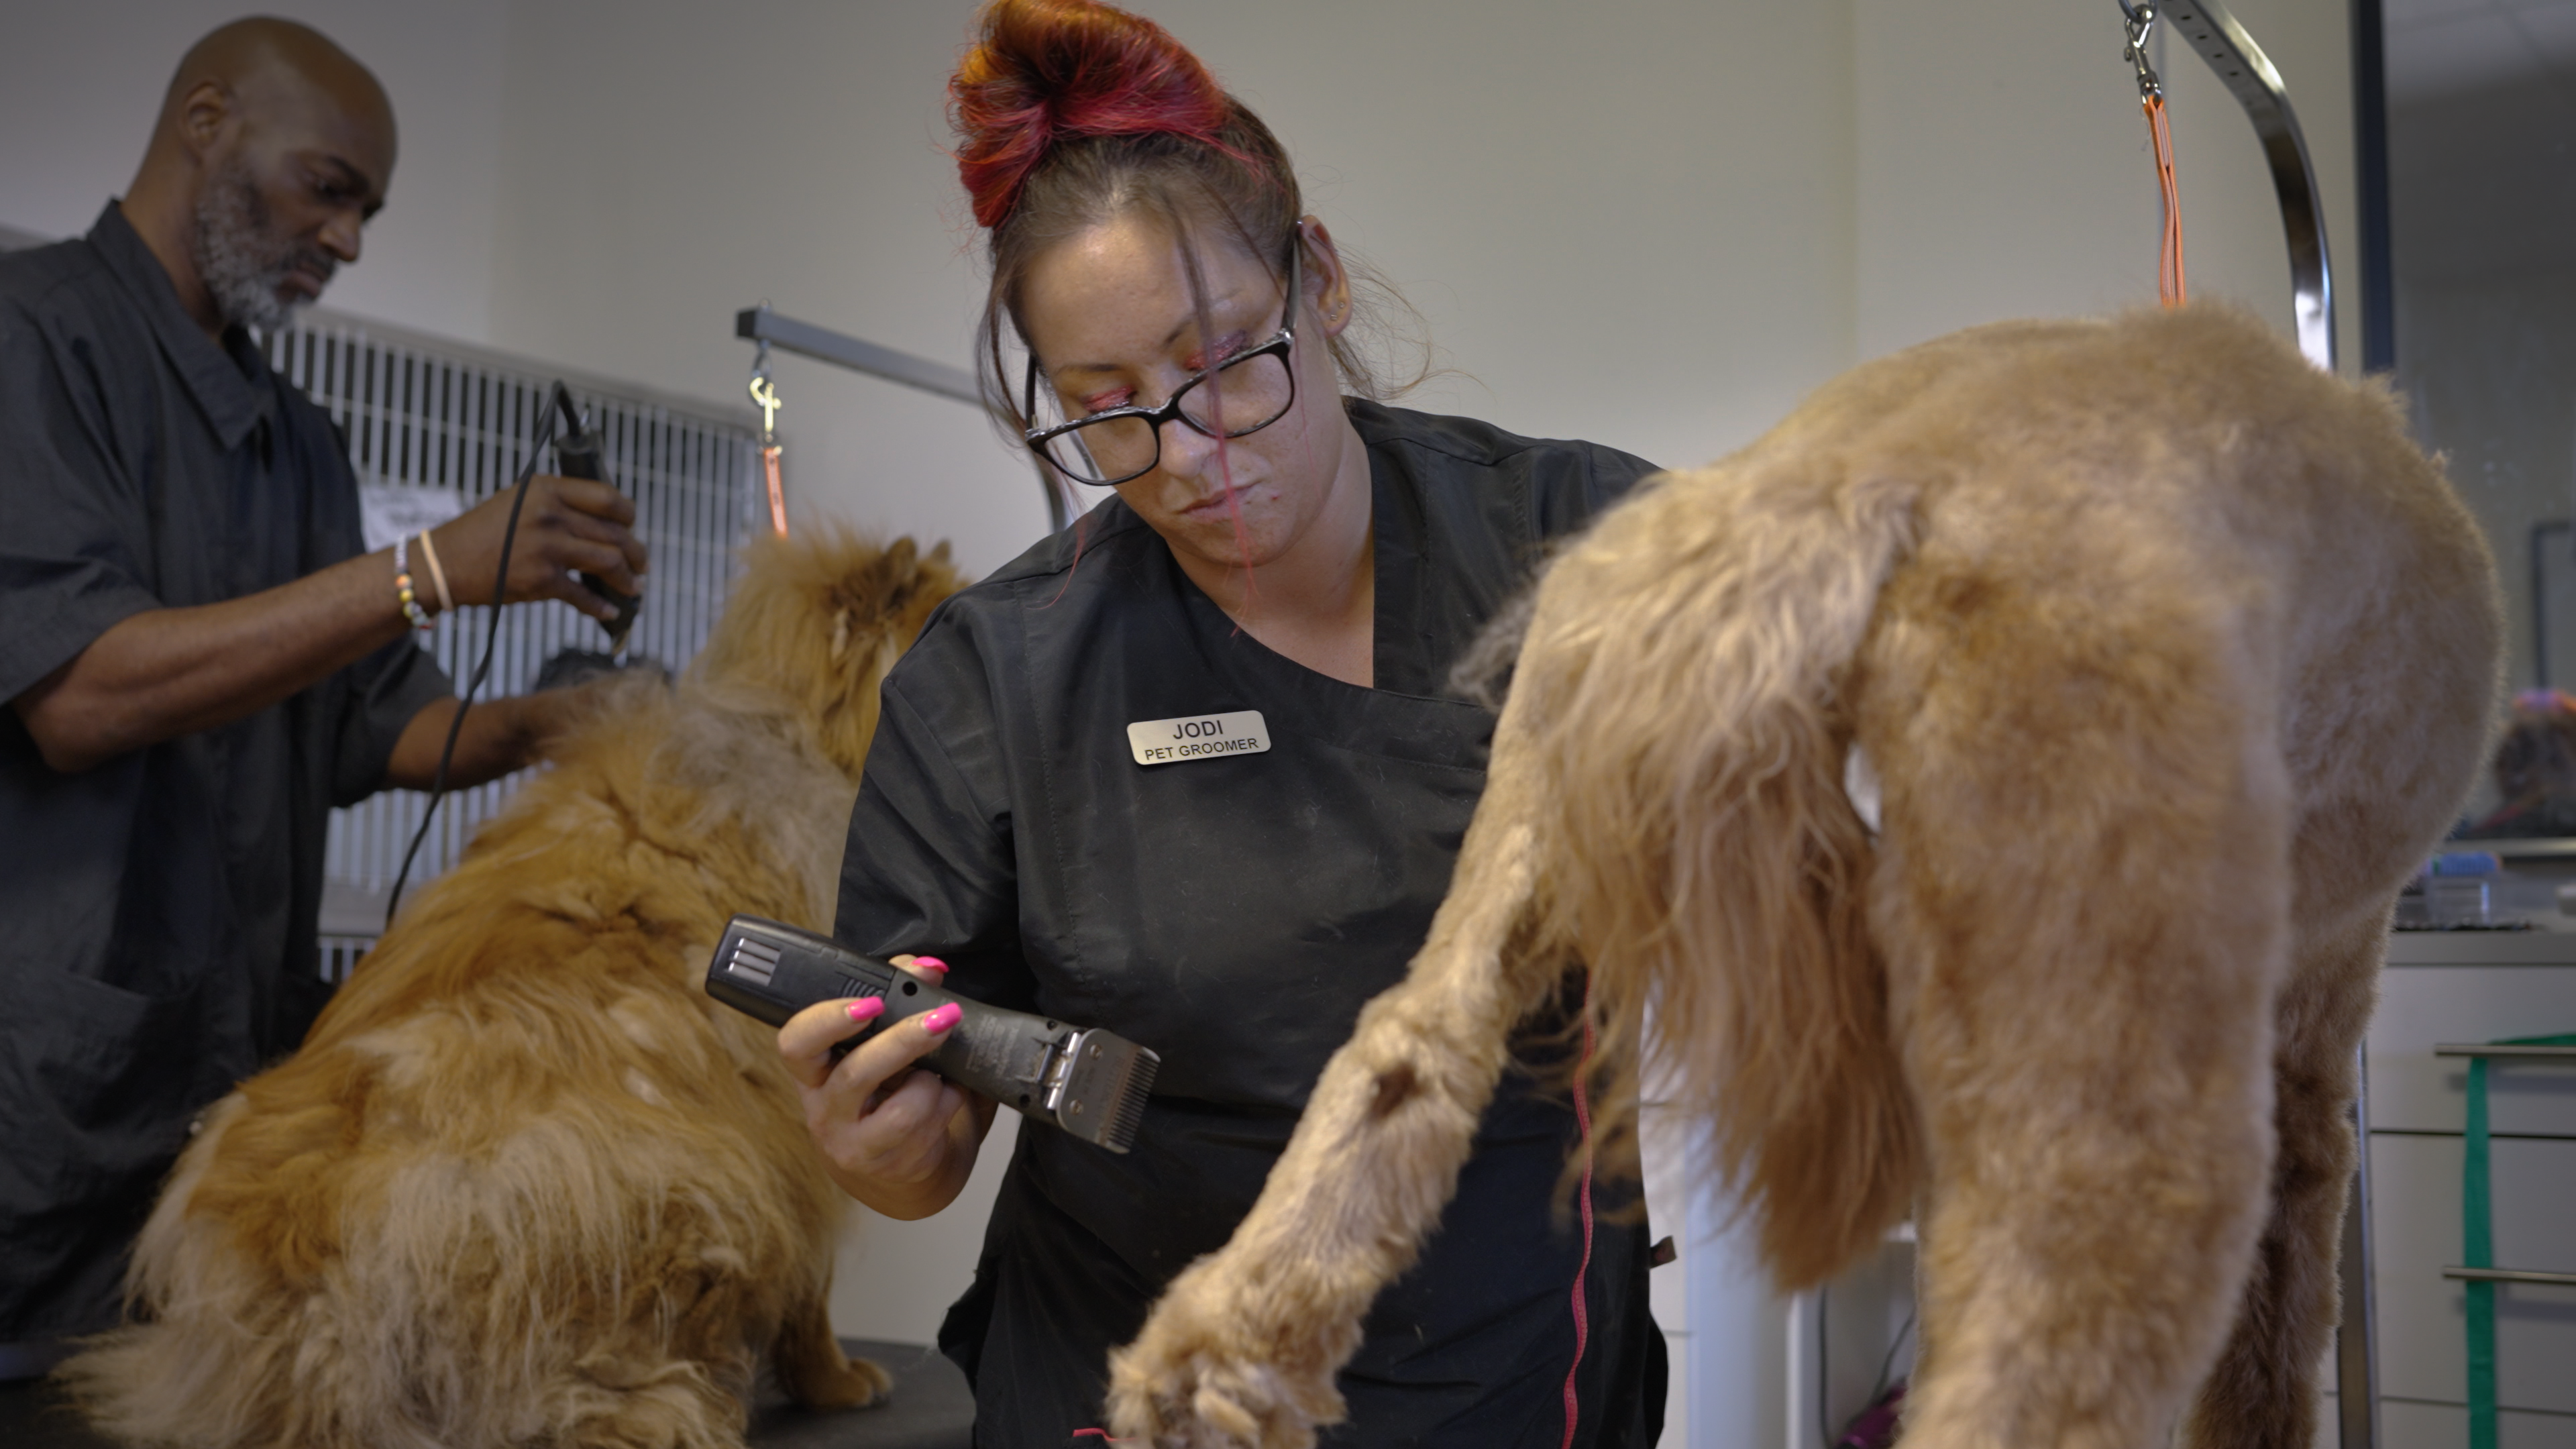 a male and a female groomer each grooming a medium sized dog with yellow fur on their own grooming table